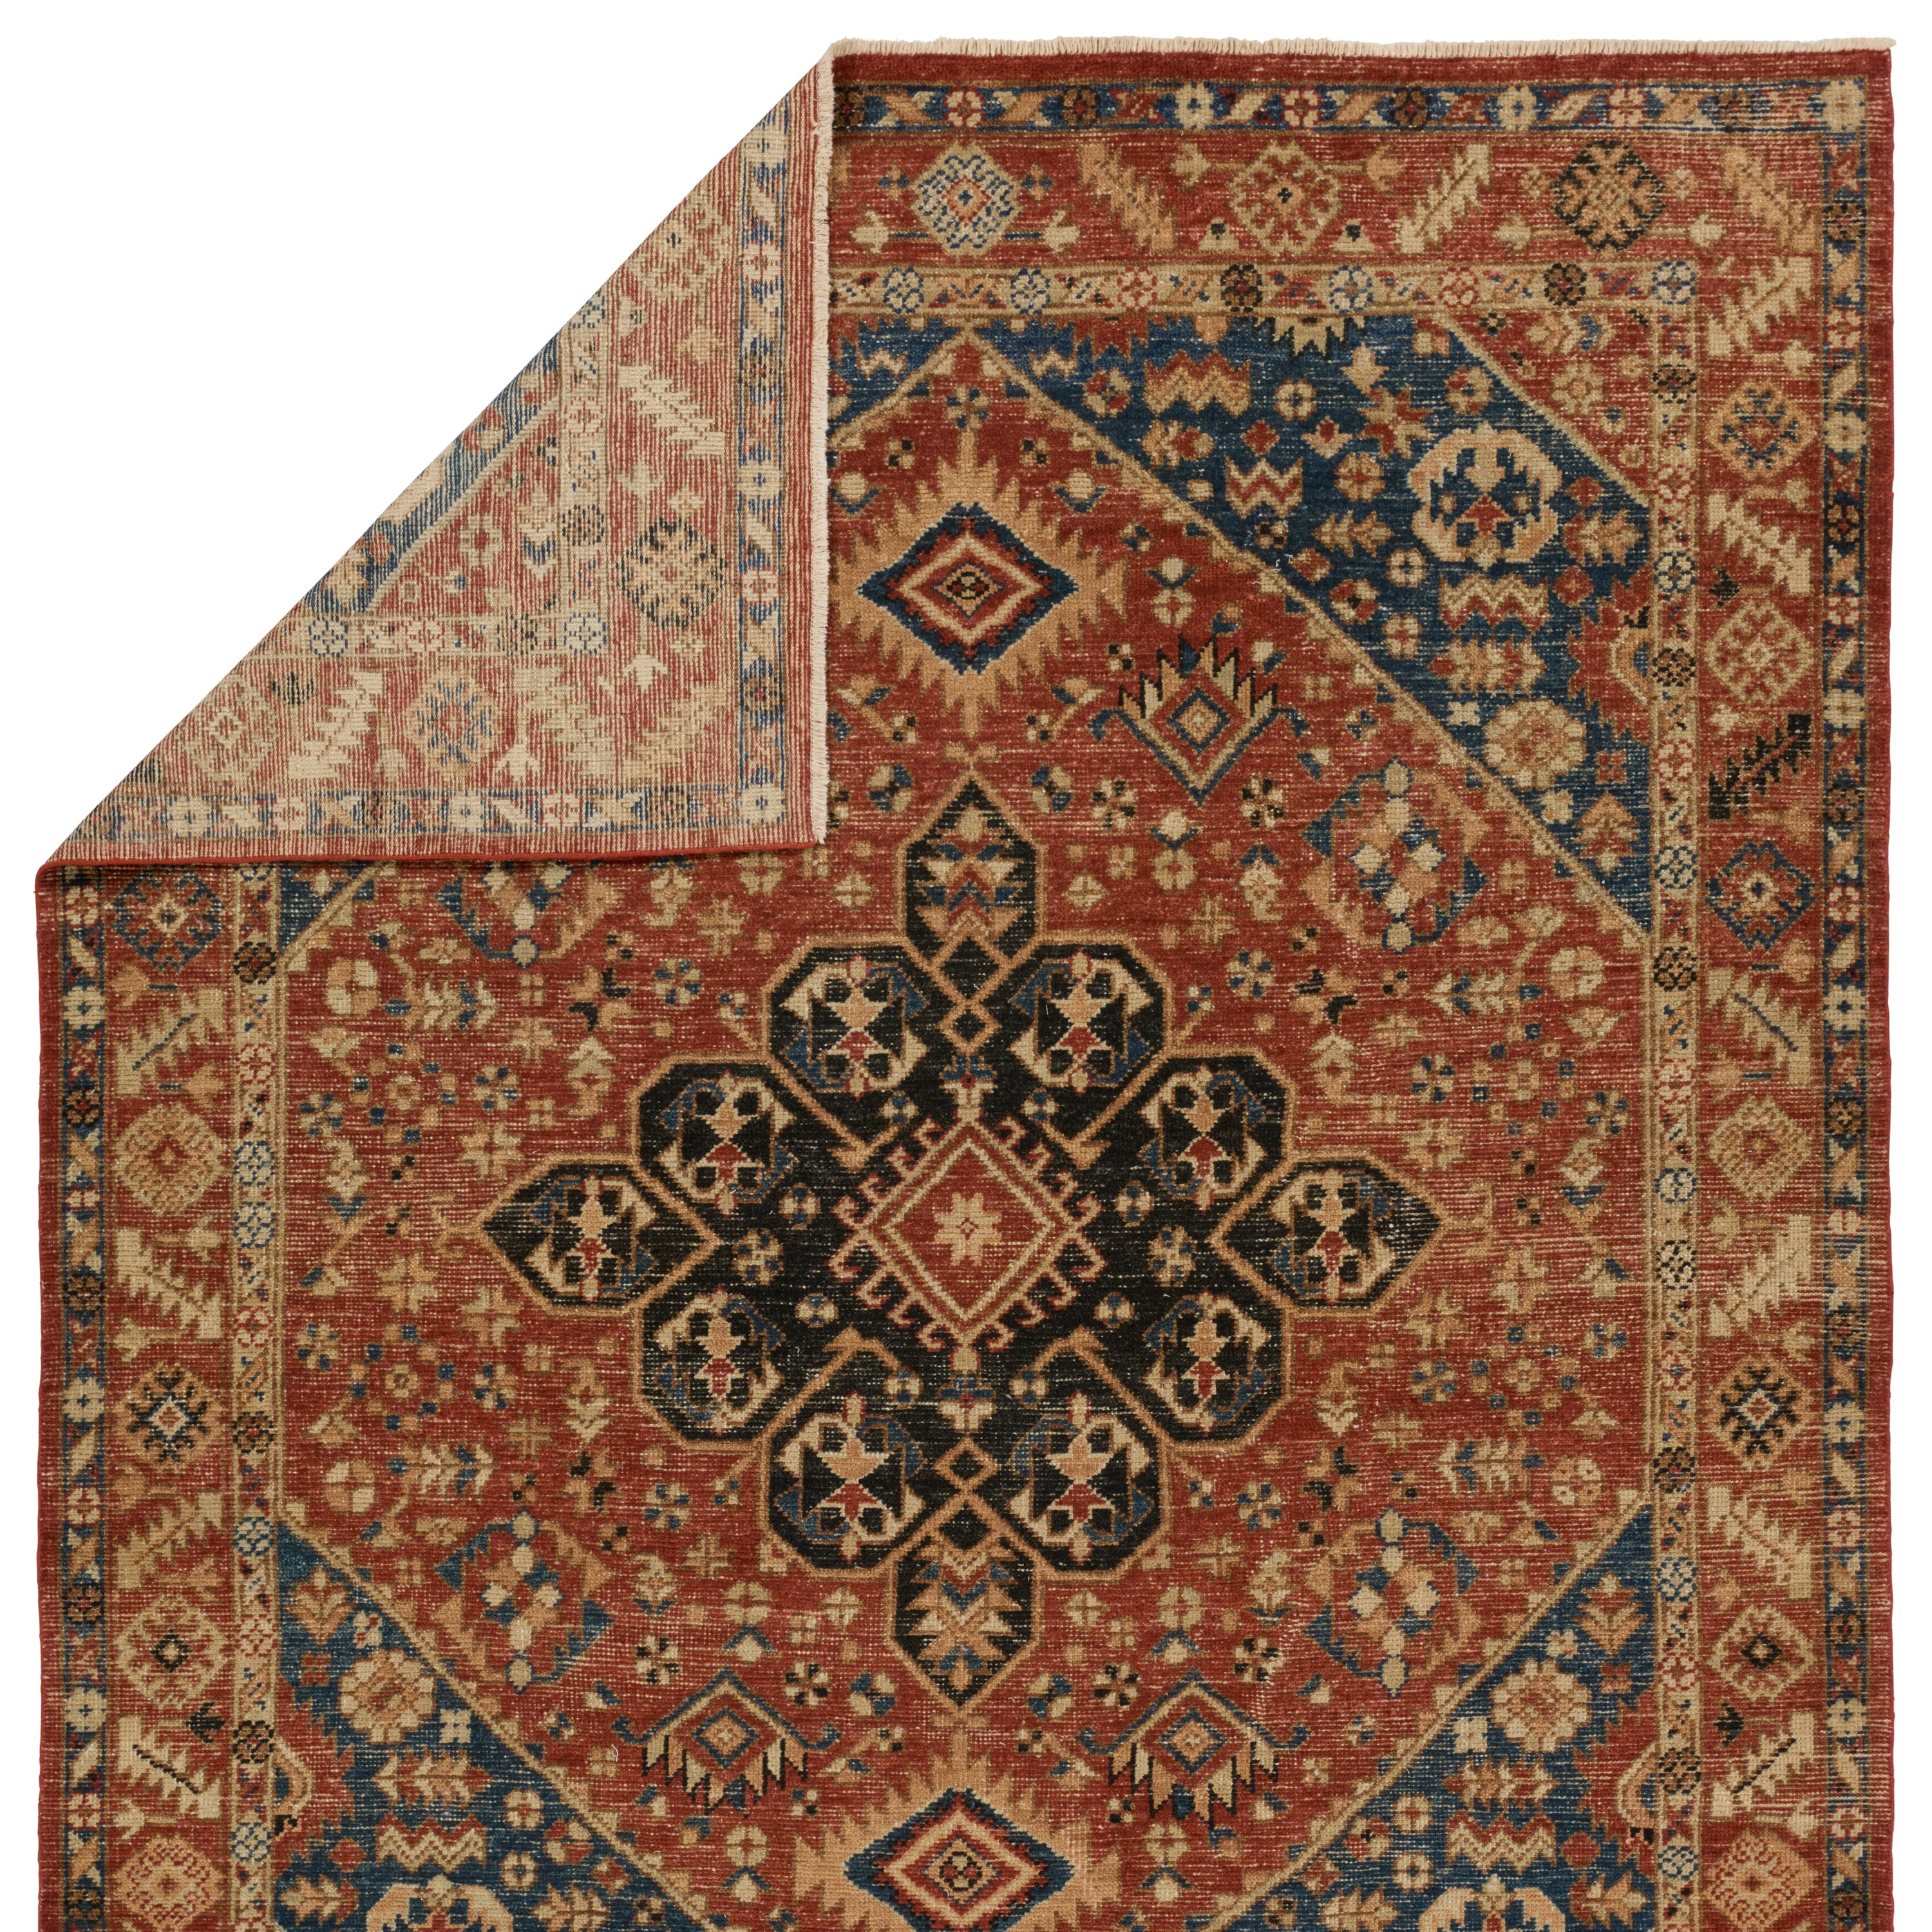 The Rhapsody collection features heirloom-quality designs of stunningly abrashed Old World patterns. The Lucius area rug boasts a beautifully washed center-medallion with a decorative border. The red tones are accented with blue, black, cream, orange, and brown hues for added depth and intrigue. This durable wool handknot anchors living spaces with a fresh take on vintage style. Amethyst Home provides interior design, new construction, custom furniture, and area rugs in the Winter Garden metro area.